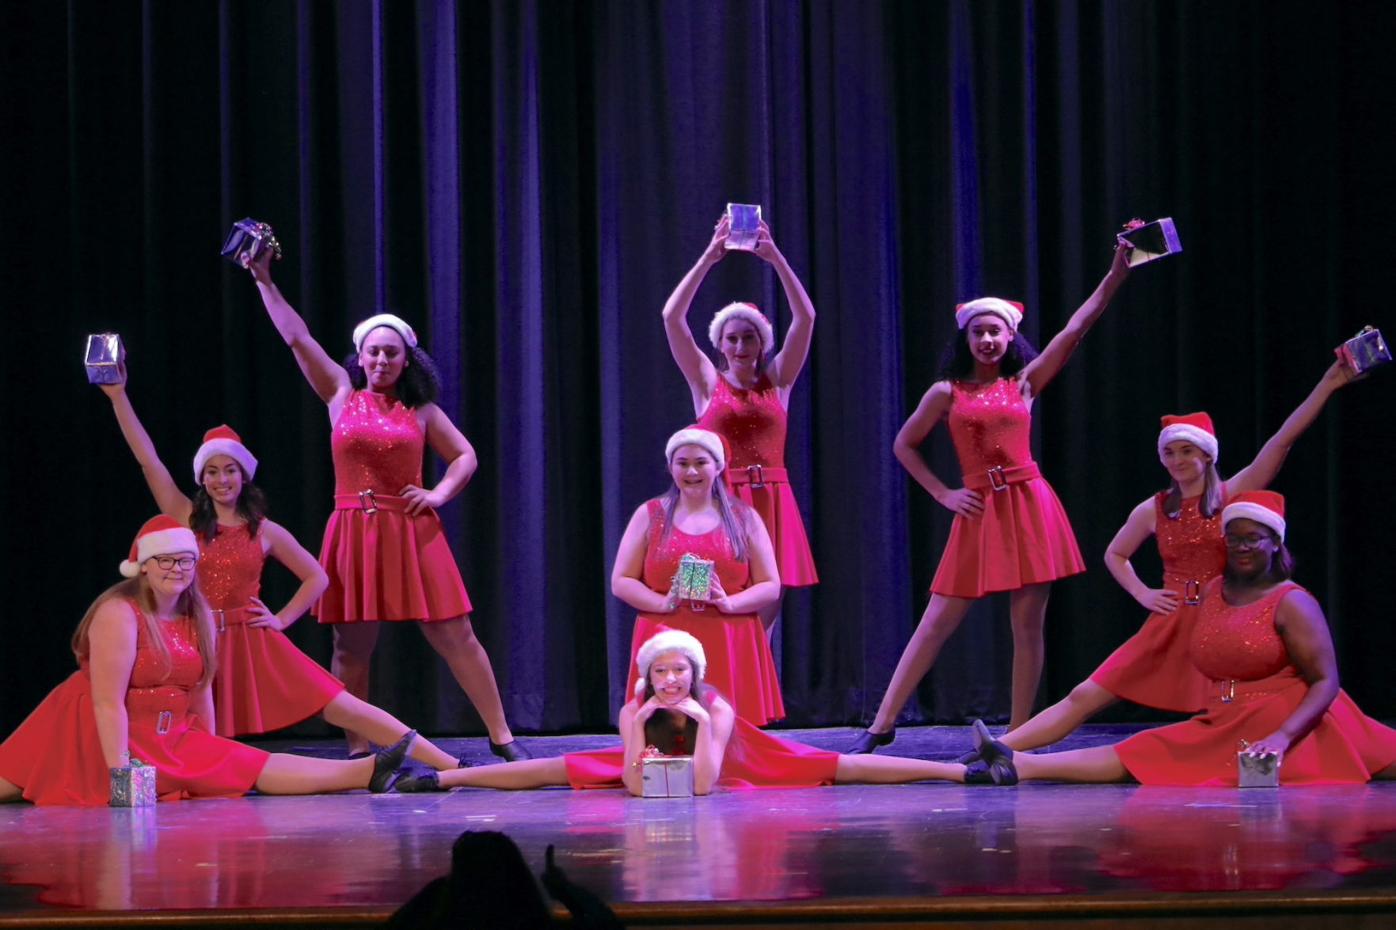 Holiday recital has more than just the performers dancing